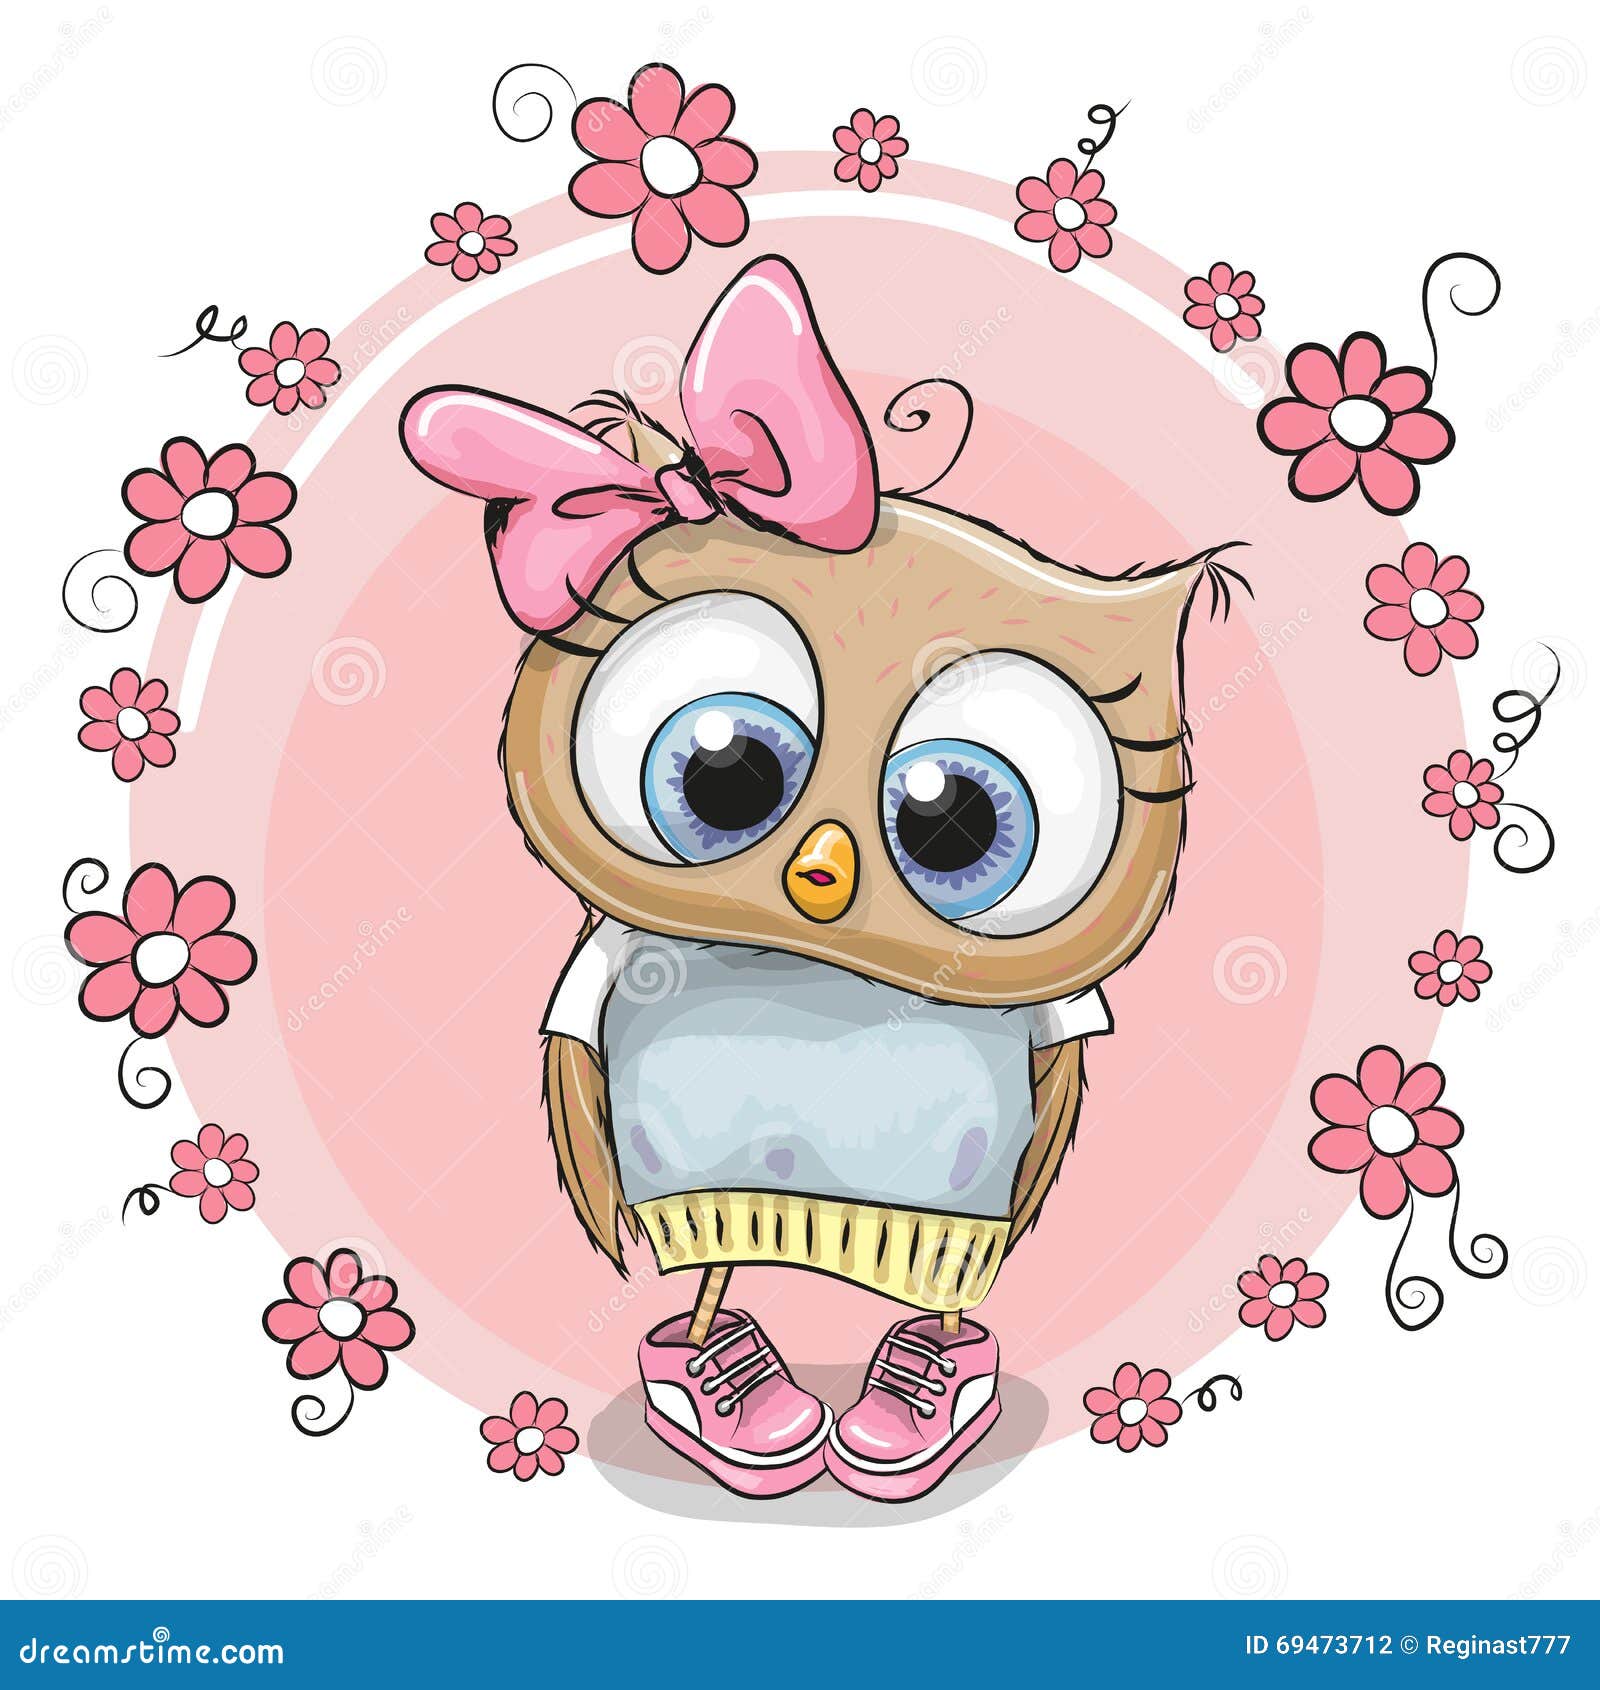 Owl with flowers stock vector. Illustration of animals - 69473712